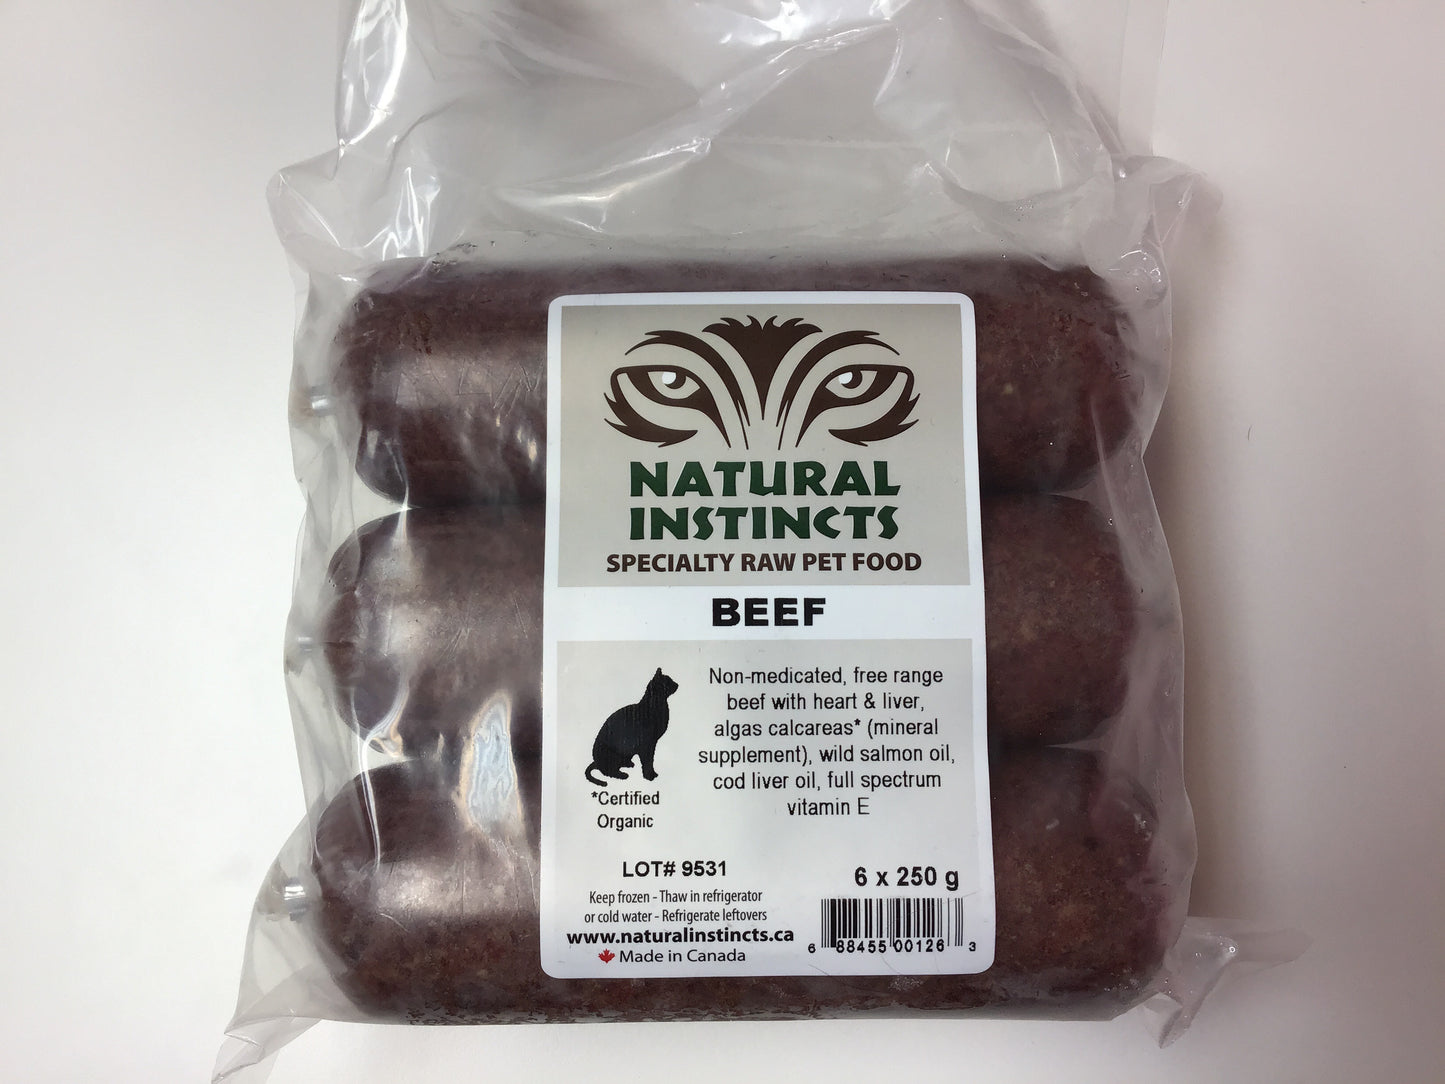 NATURAL INSTINCTS Bulk Raw Beef Non-Medicated, 6 x 250